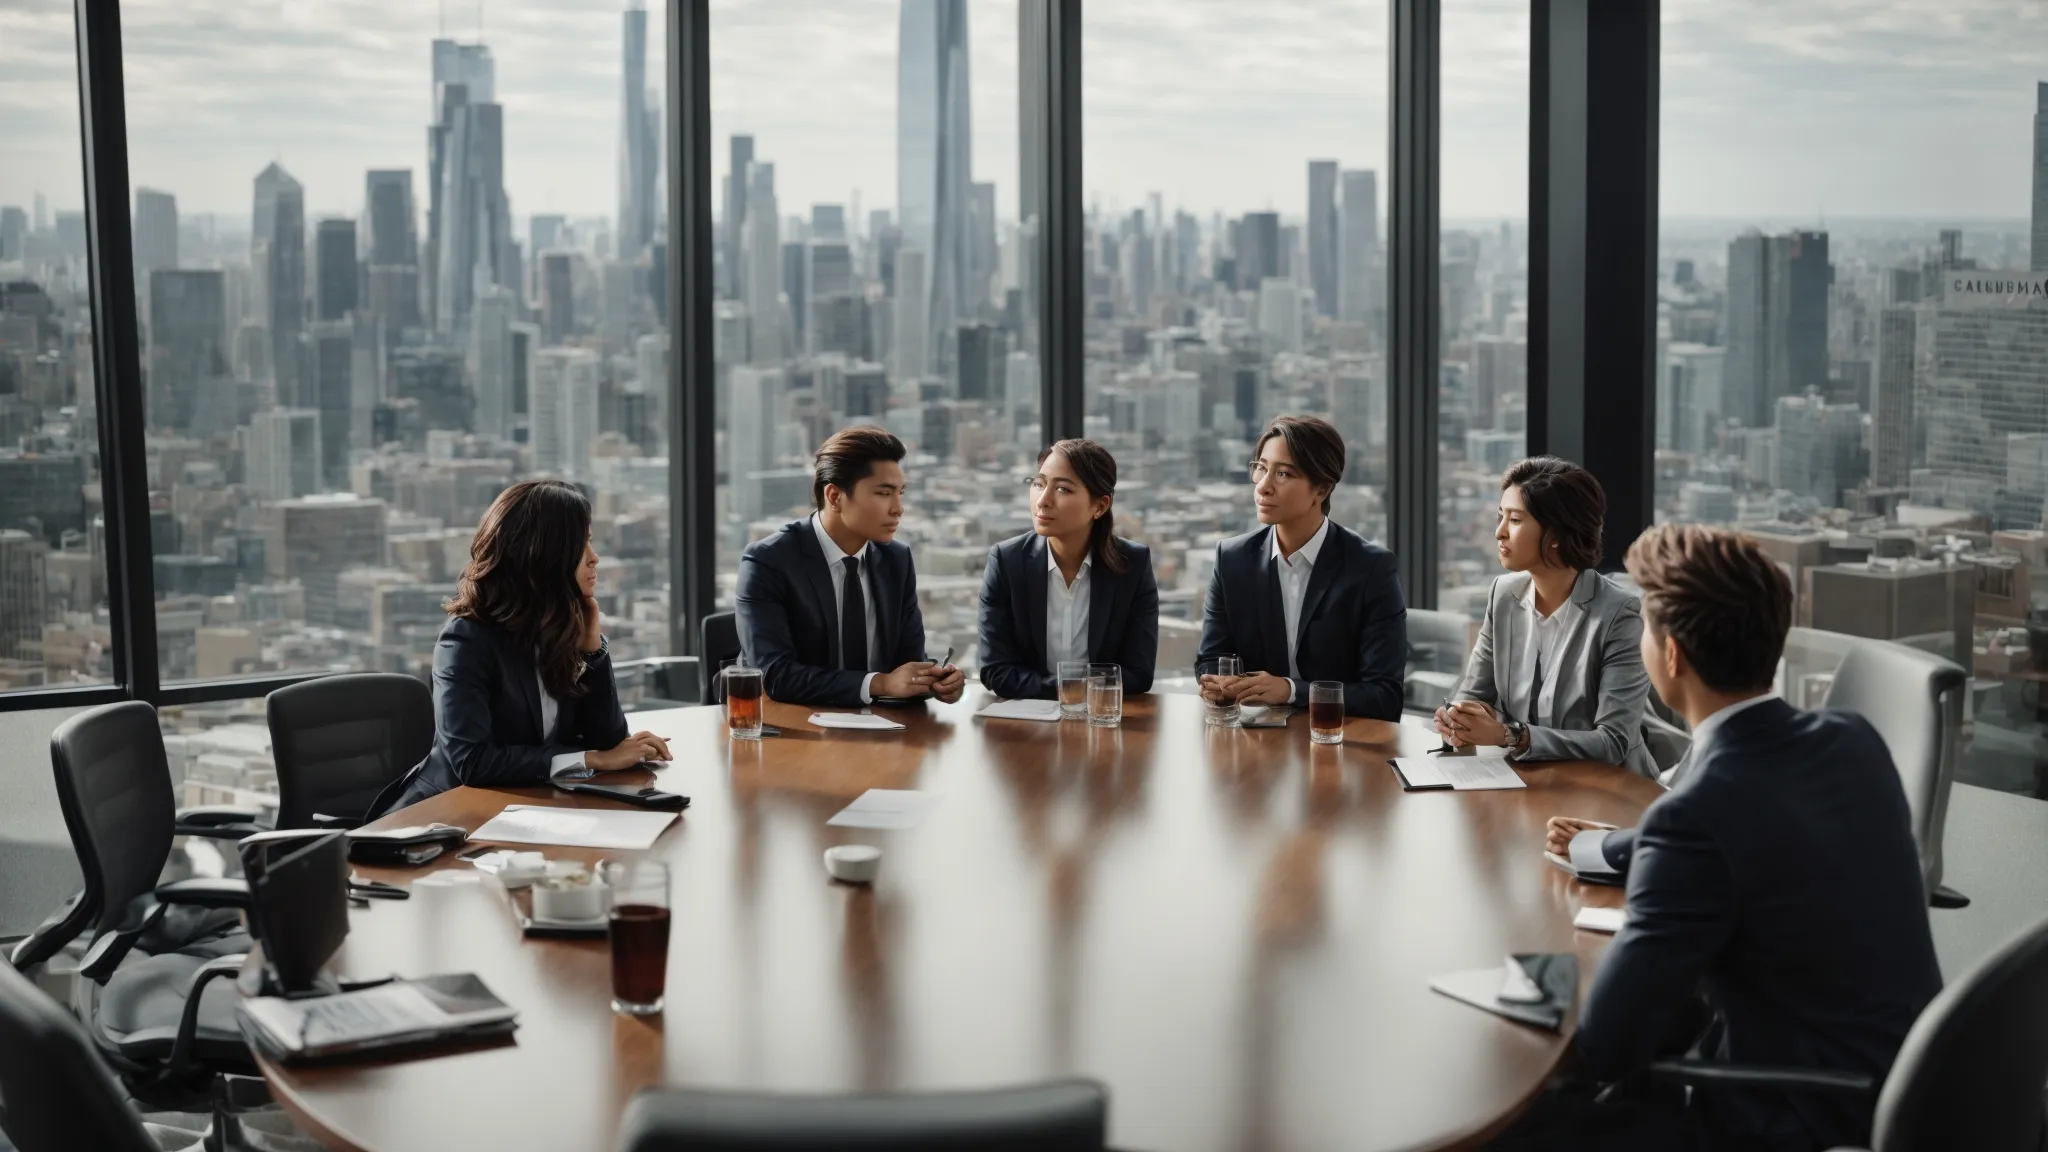 a group of professionals engaged in a roundtable discussion within a modern office overlooking a city skyline.